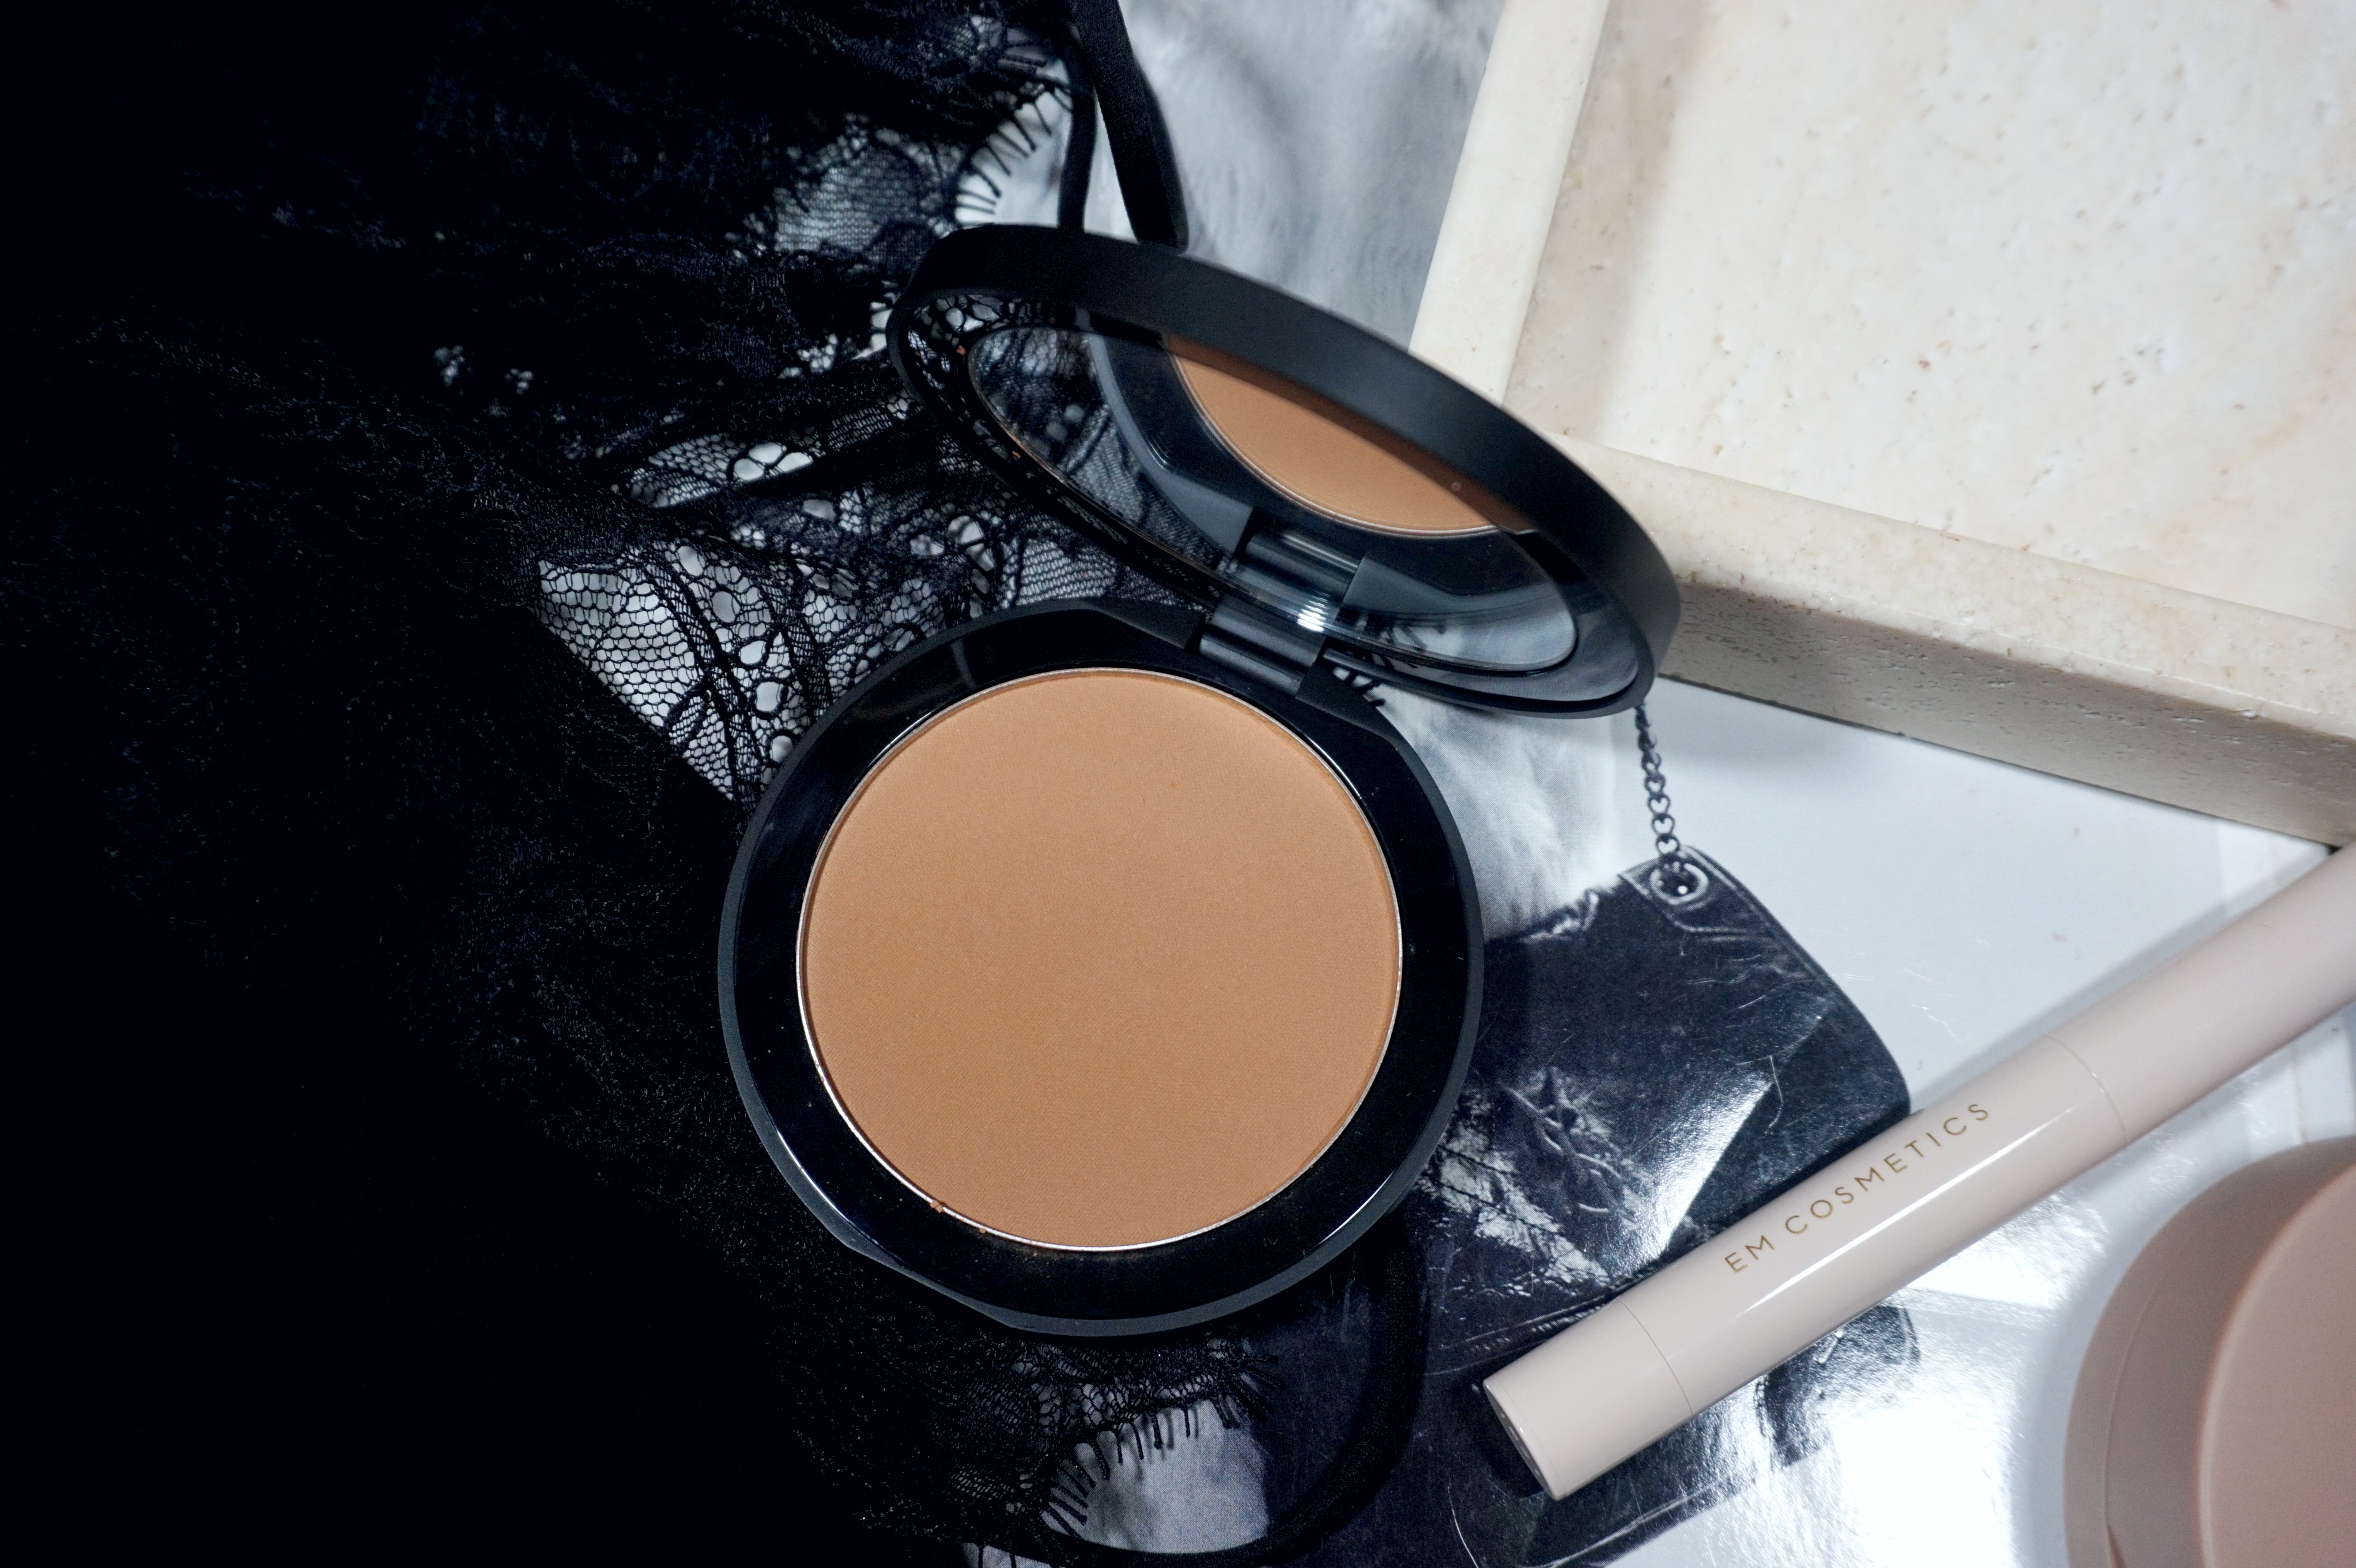 Em Cosmetics Corselette Sculpting Powder Bronzer Review and Swatches